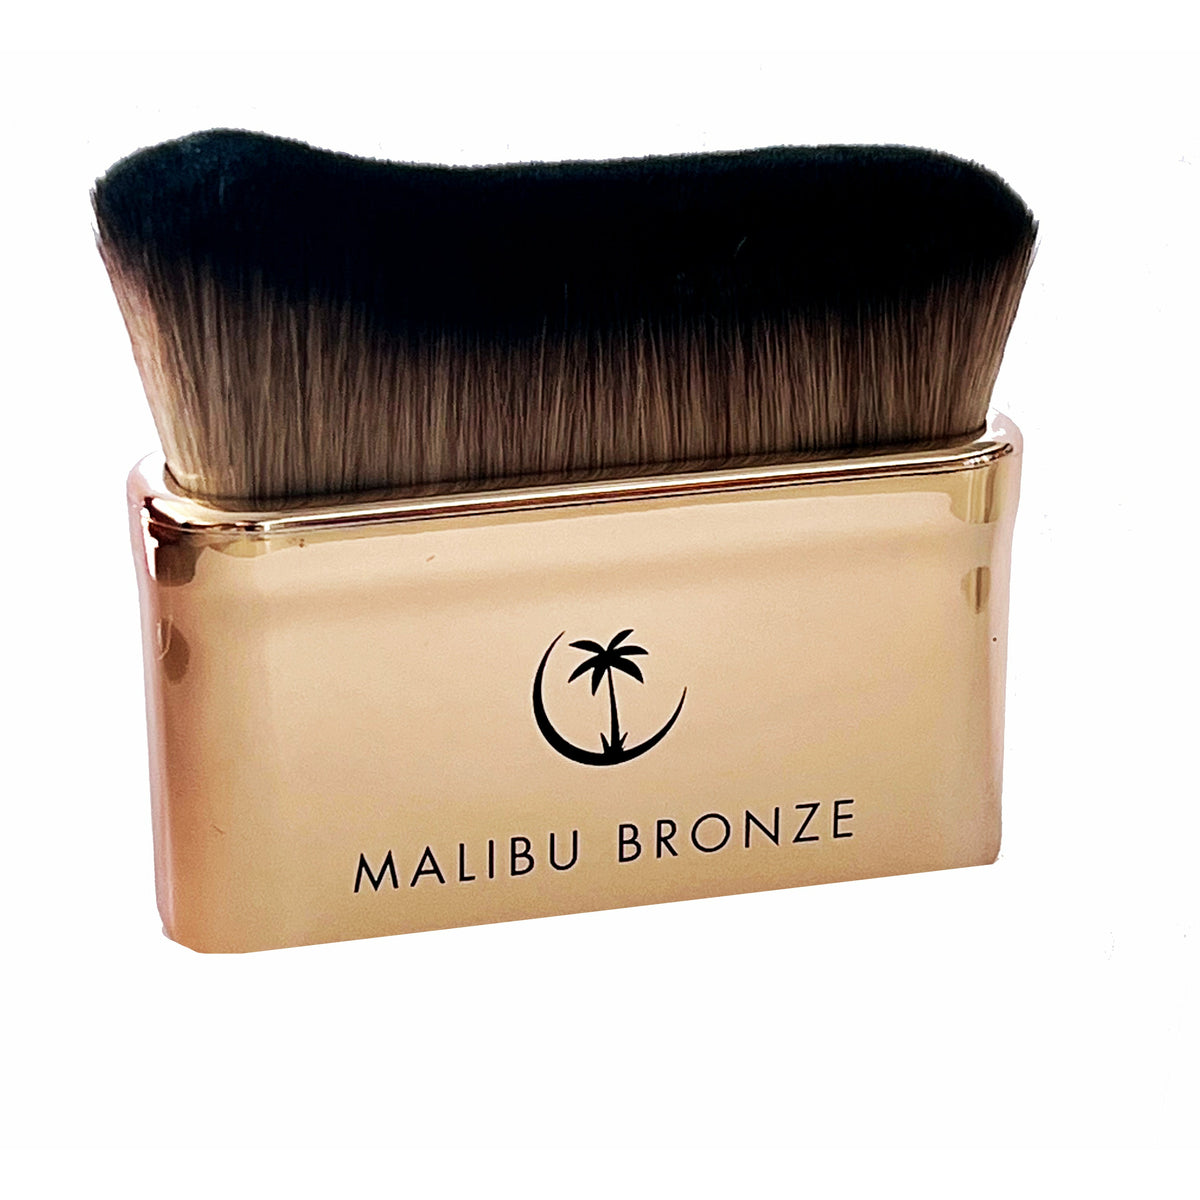 The Malibu Bronze Body Blending Brush used to apply malibu bronze tan foam on body and face to effectively cover all body parts with a beautiful, deep, rich color tan. 